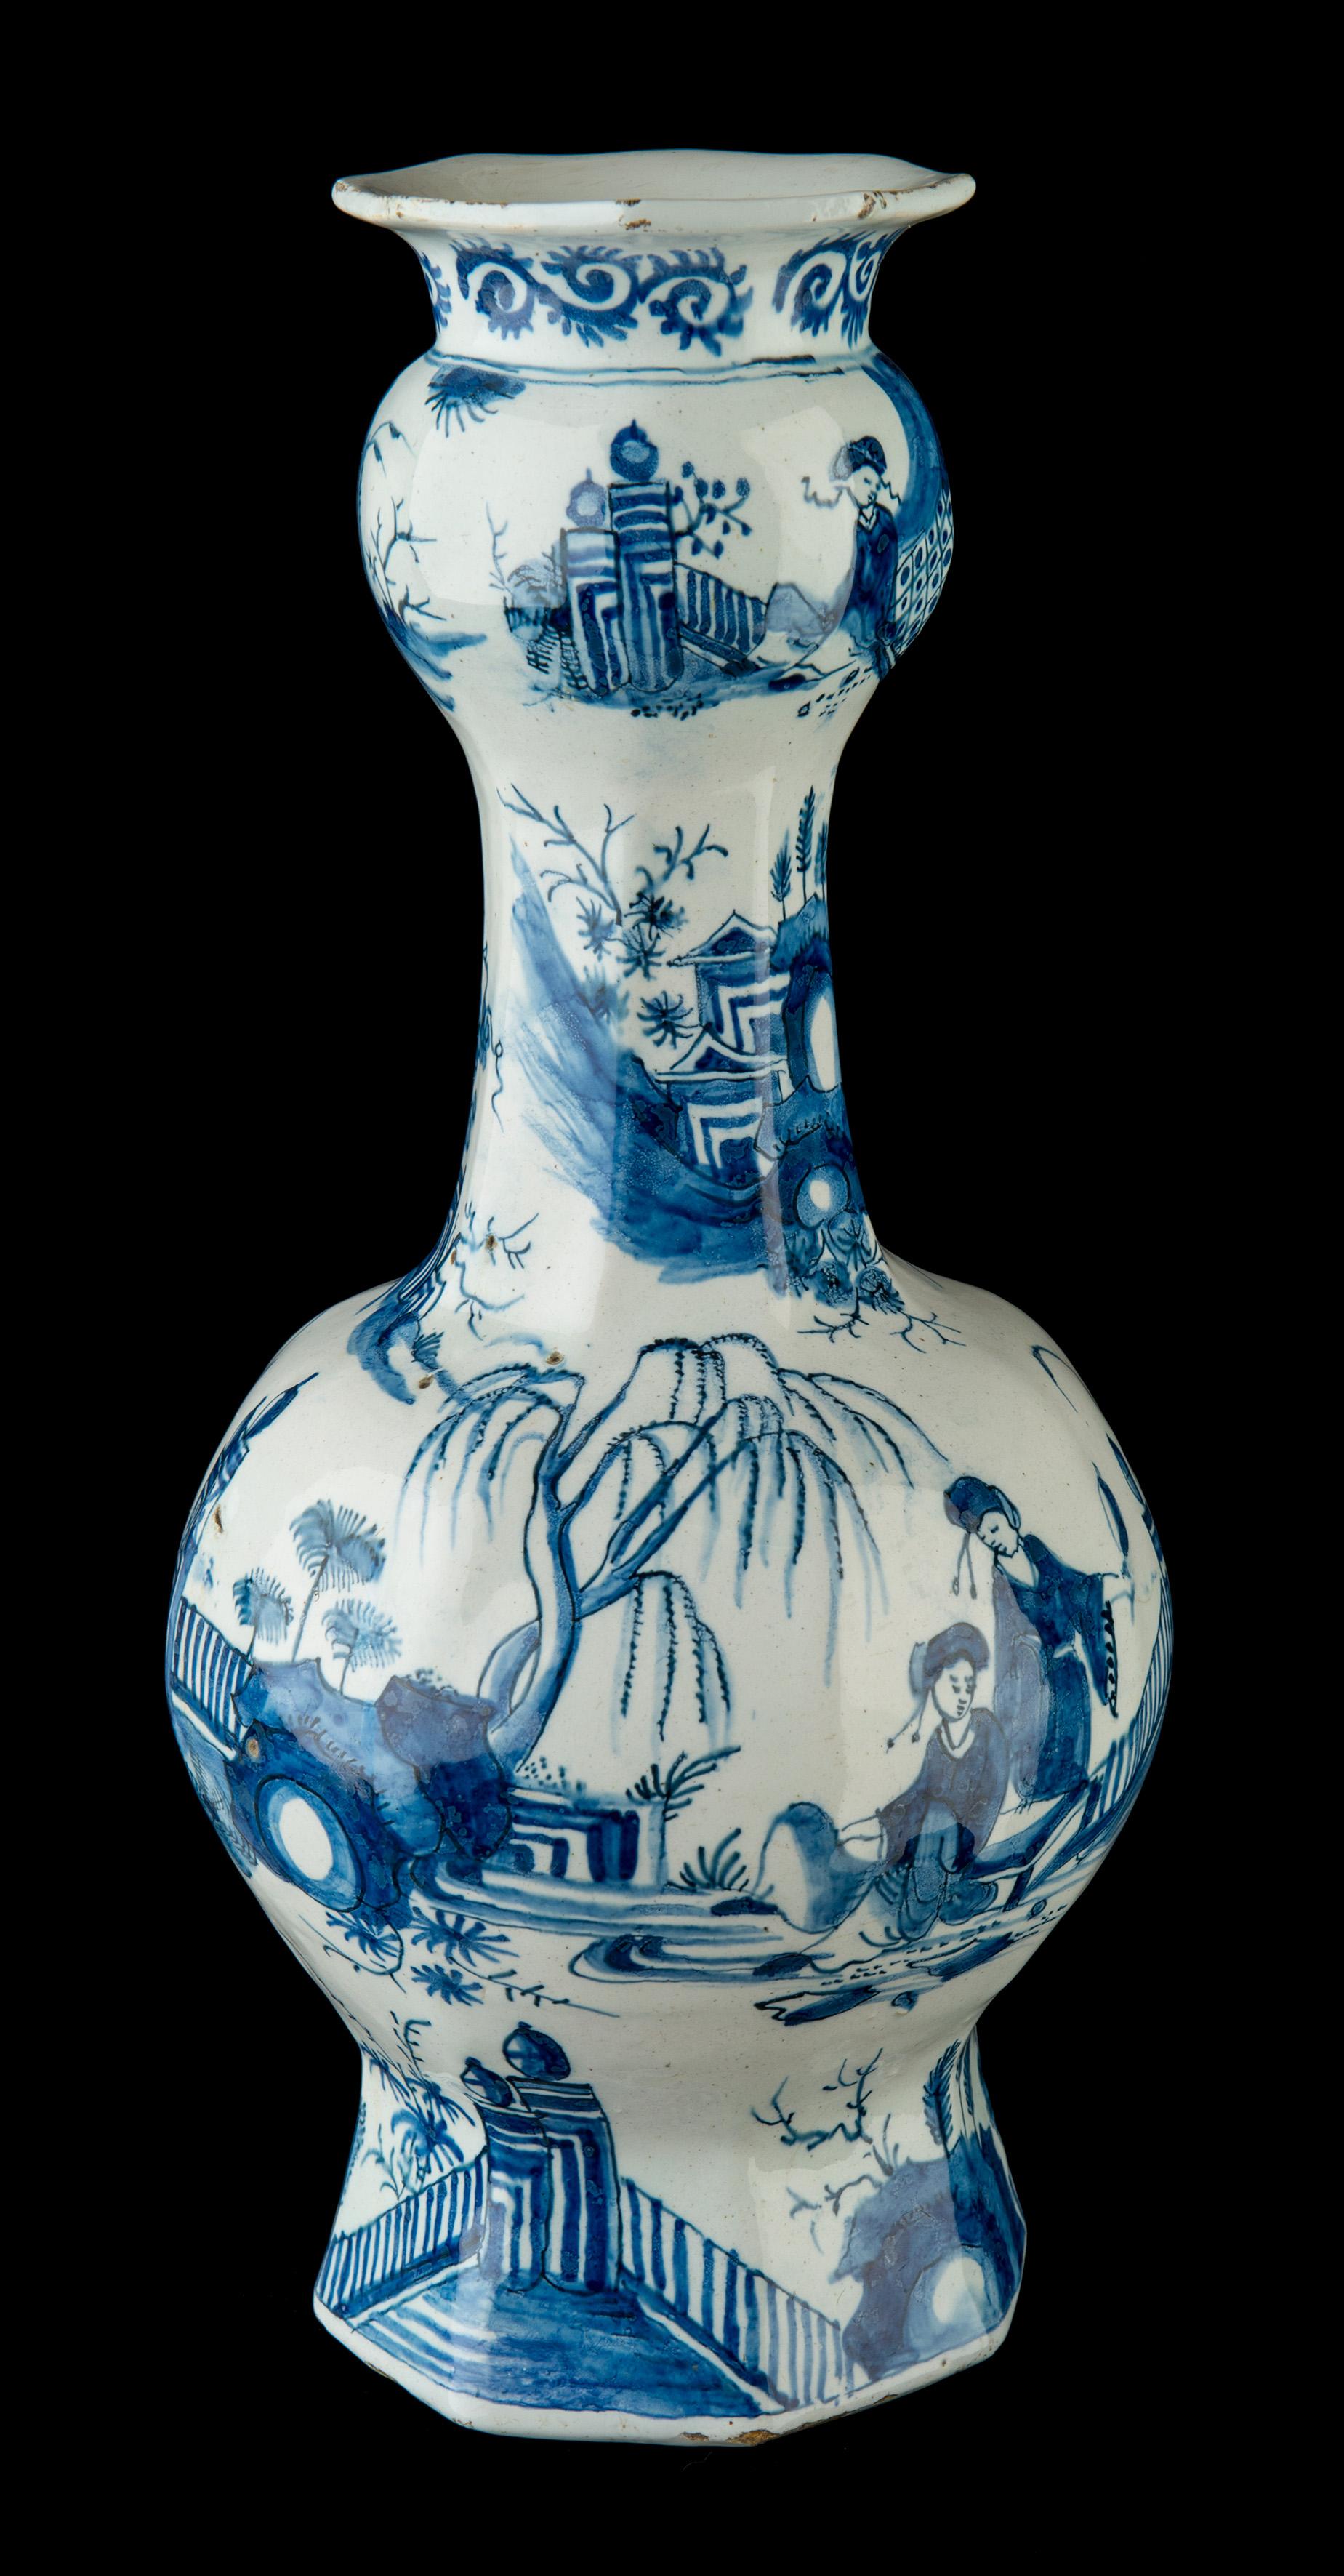 Hand-Painted Delft, Pair of Blue and White Garlic-Head Bottle Vases, circa 1700